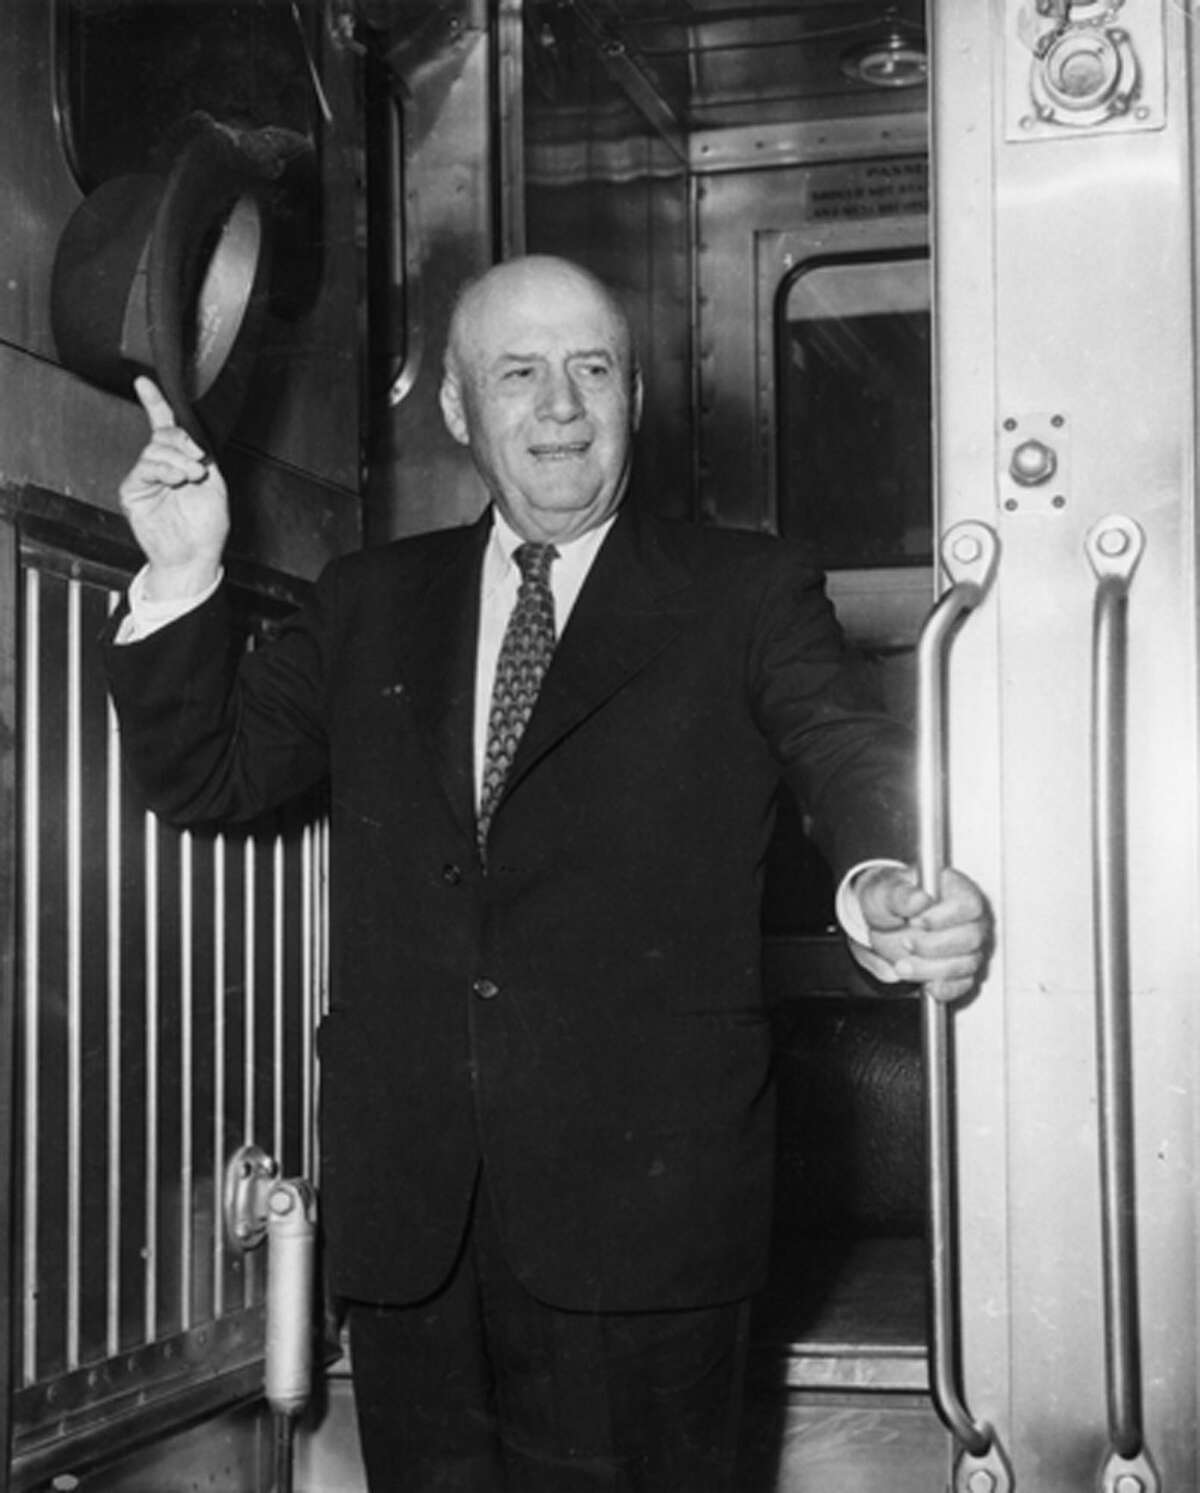 Sam Rayburn, shown on a train, was the longest-serving speaker in the House of Representatives.